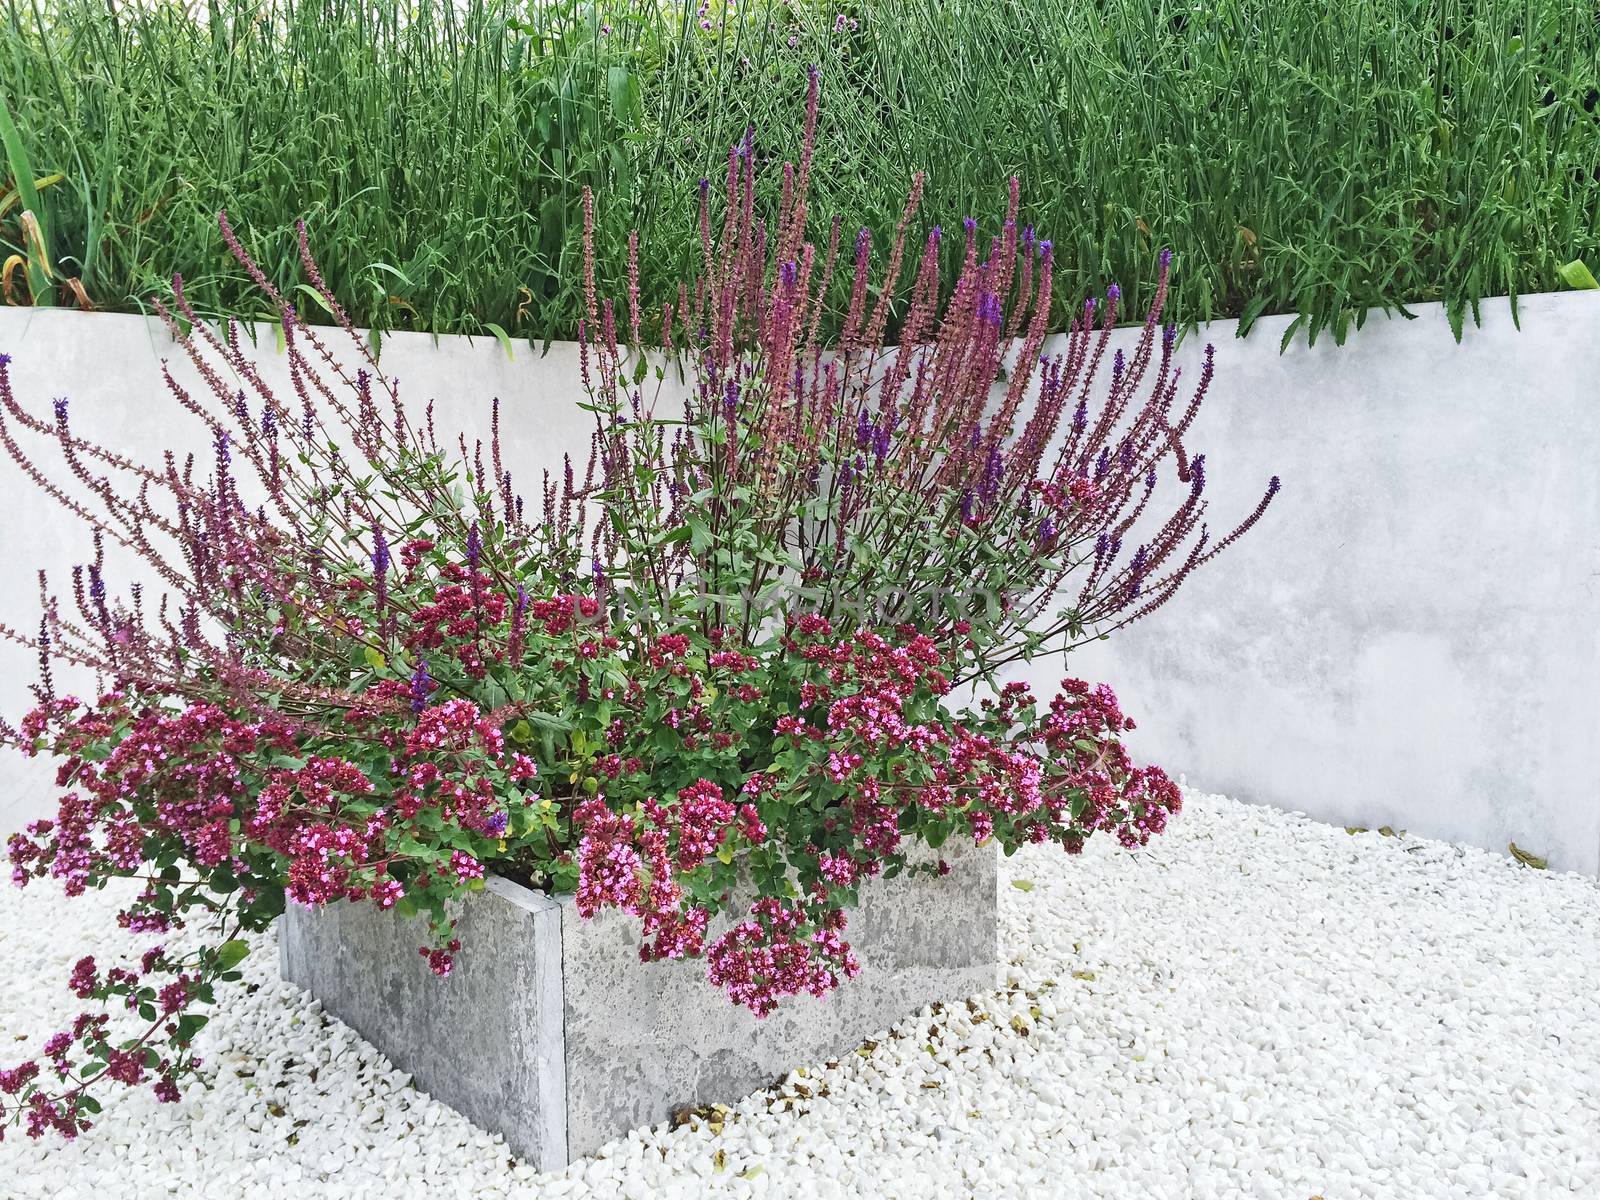 Flowerbed with purple flowers. Detail of a garden with contemporary design.